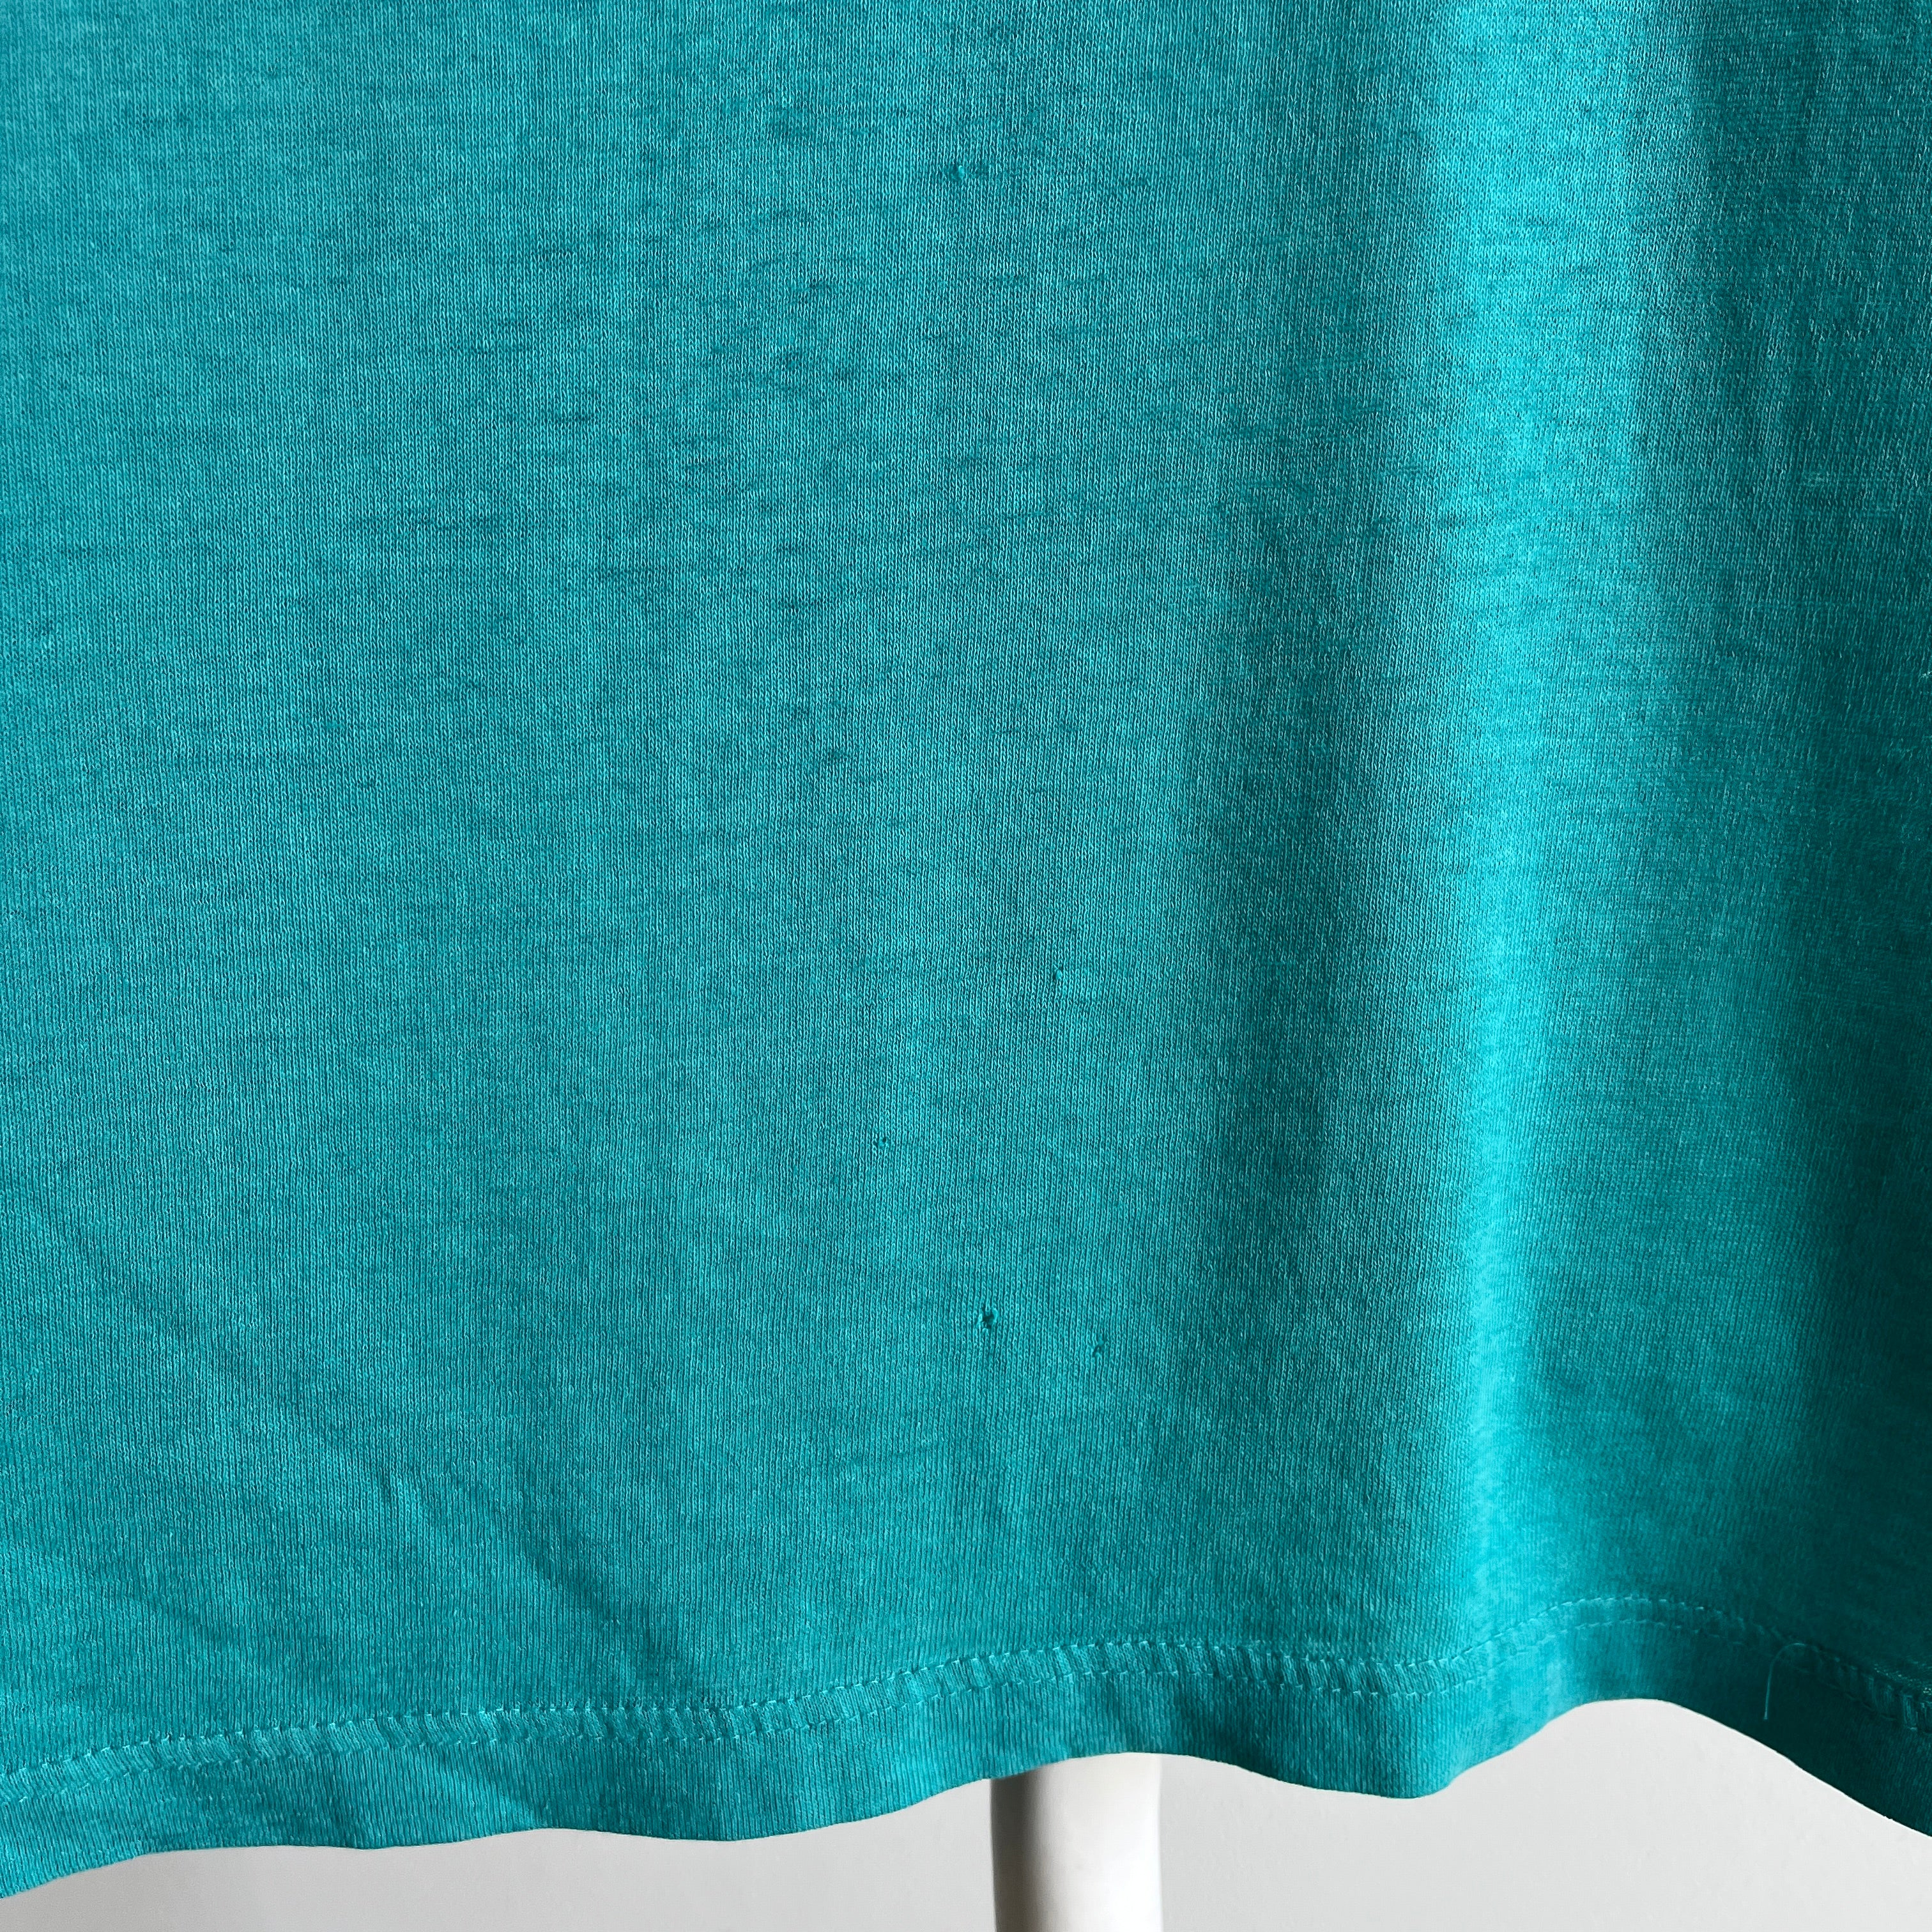 1980s Paper Thin Teal Pocket T-Shirt (the brand)